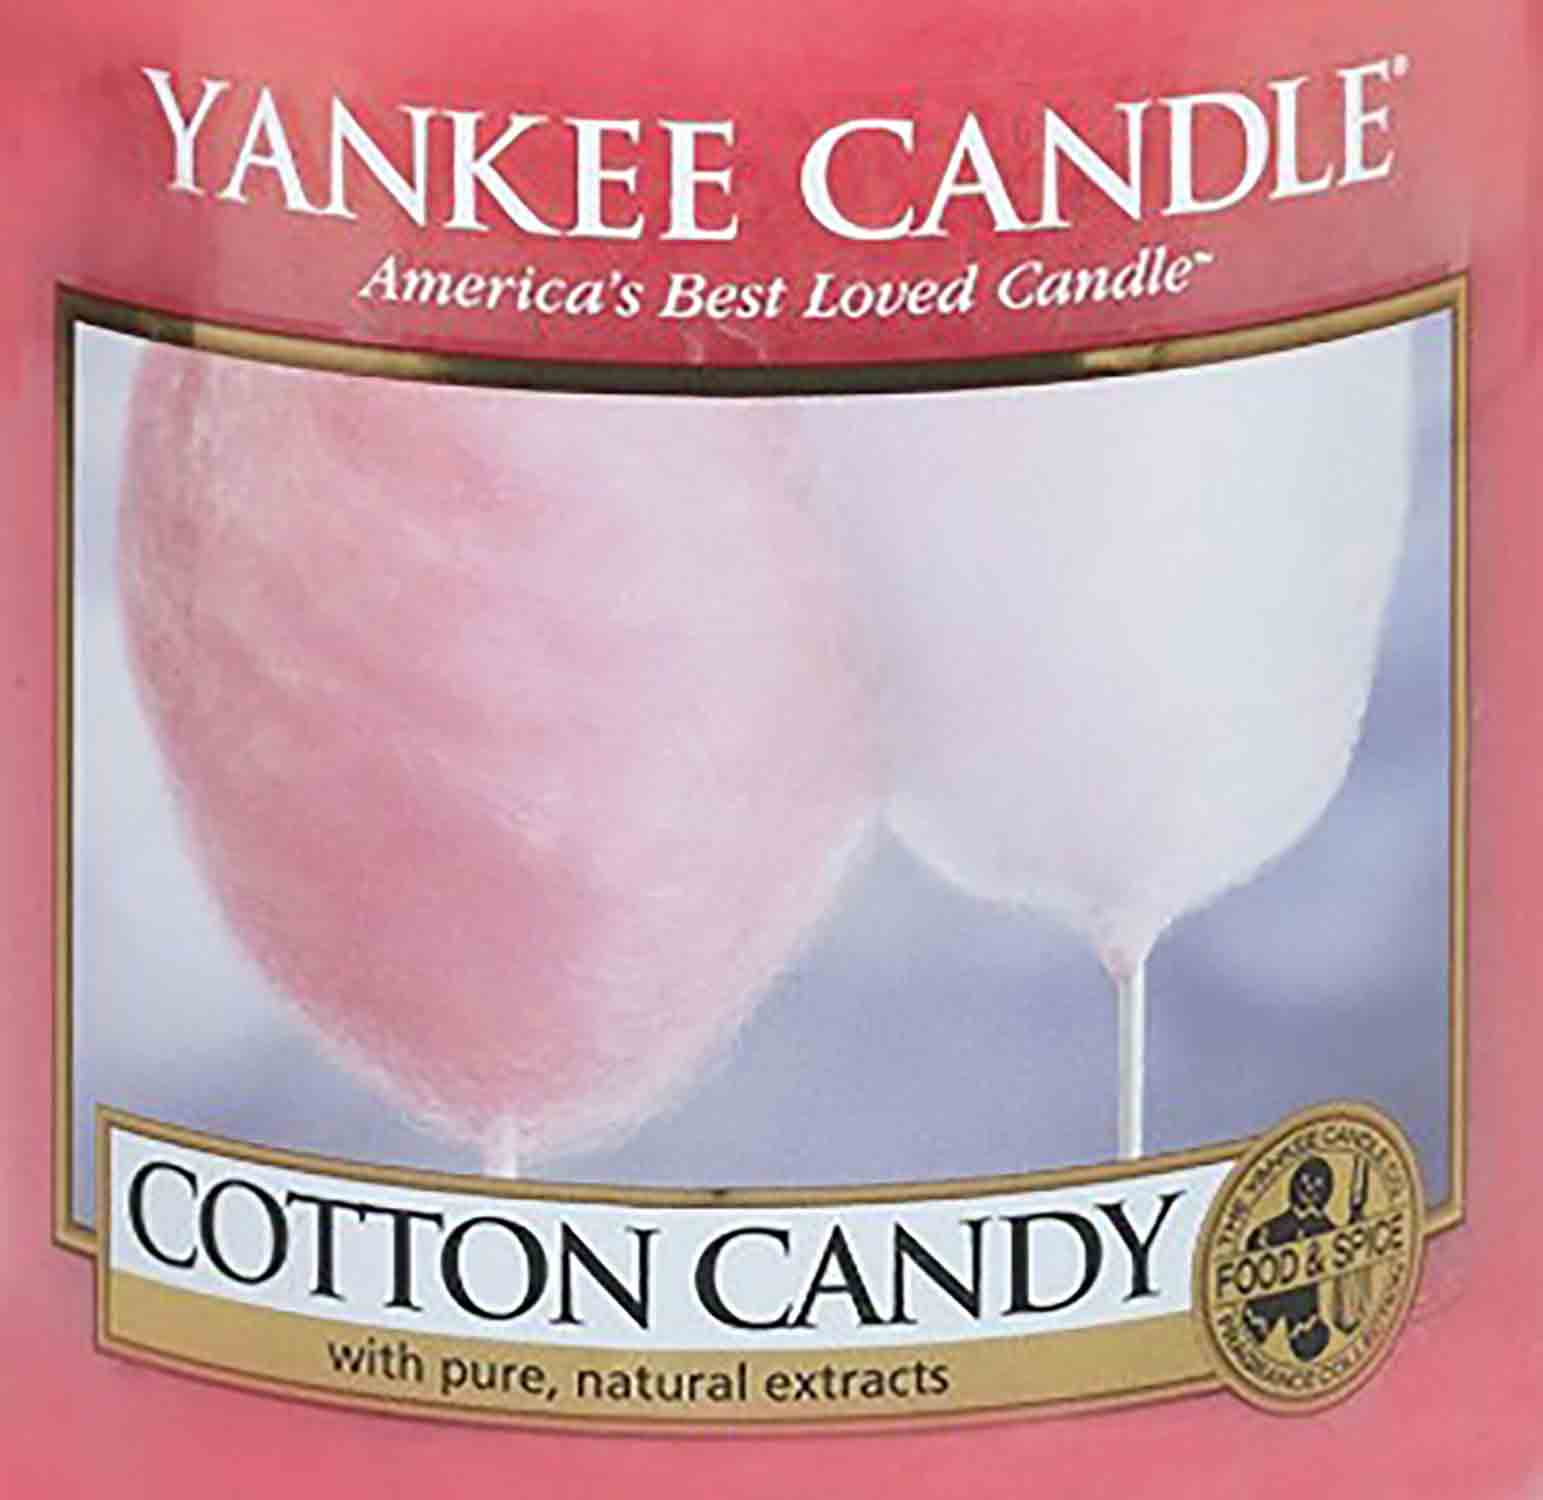 Yankee Candle Cotton Candy USA 22 g - Crumble vosk